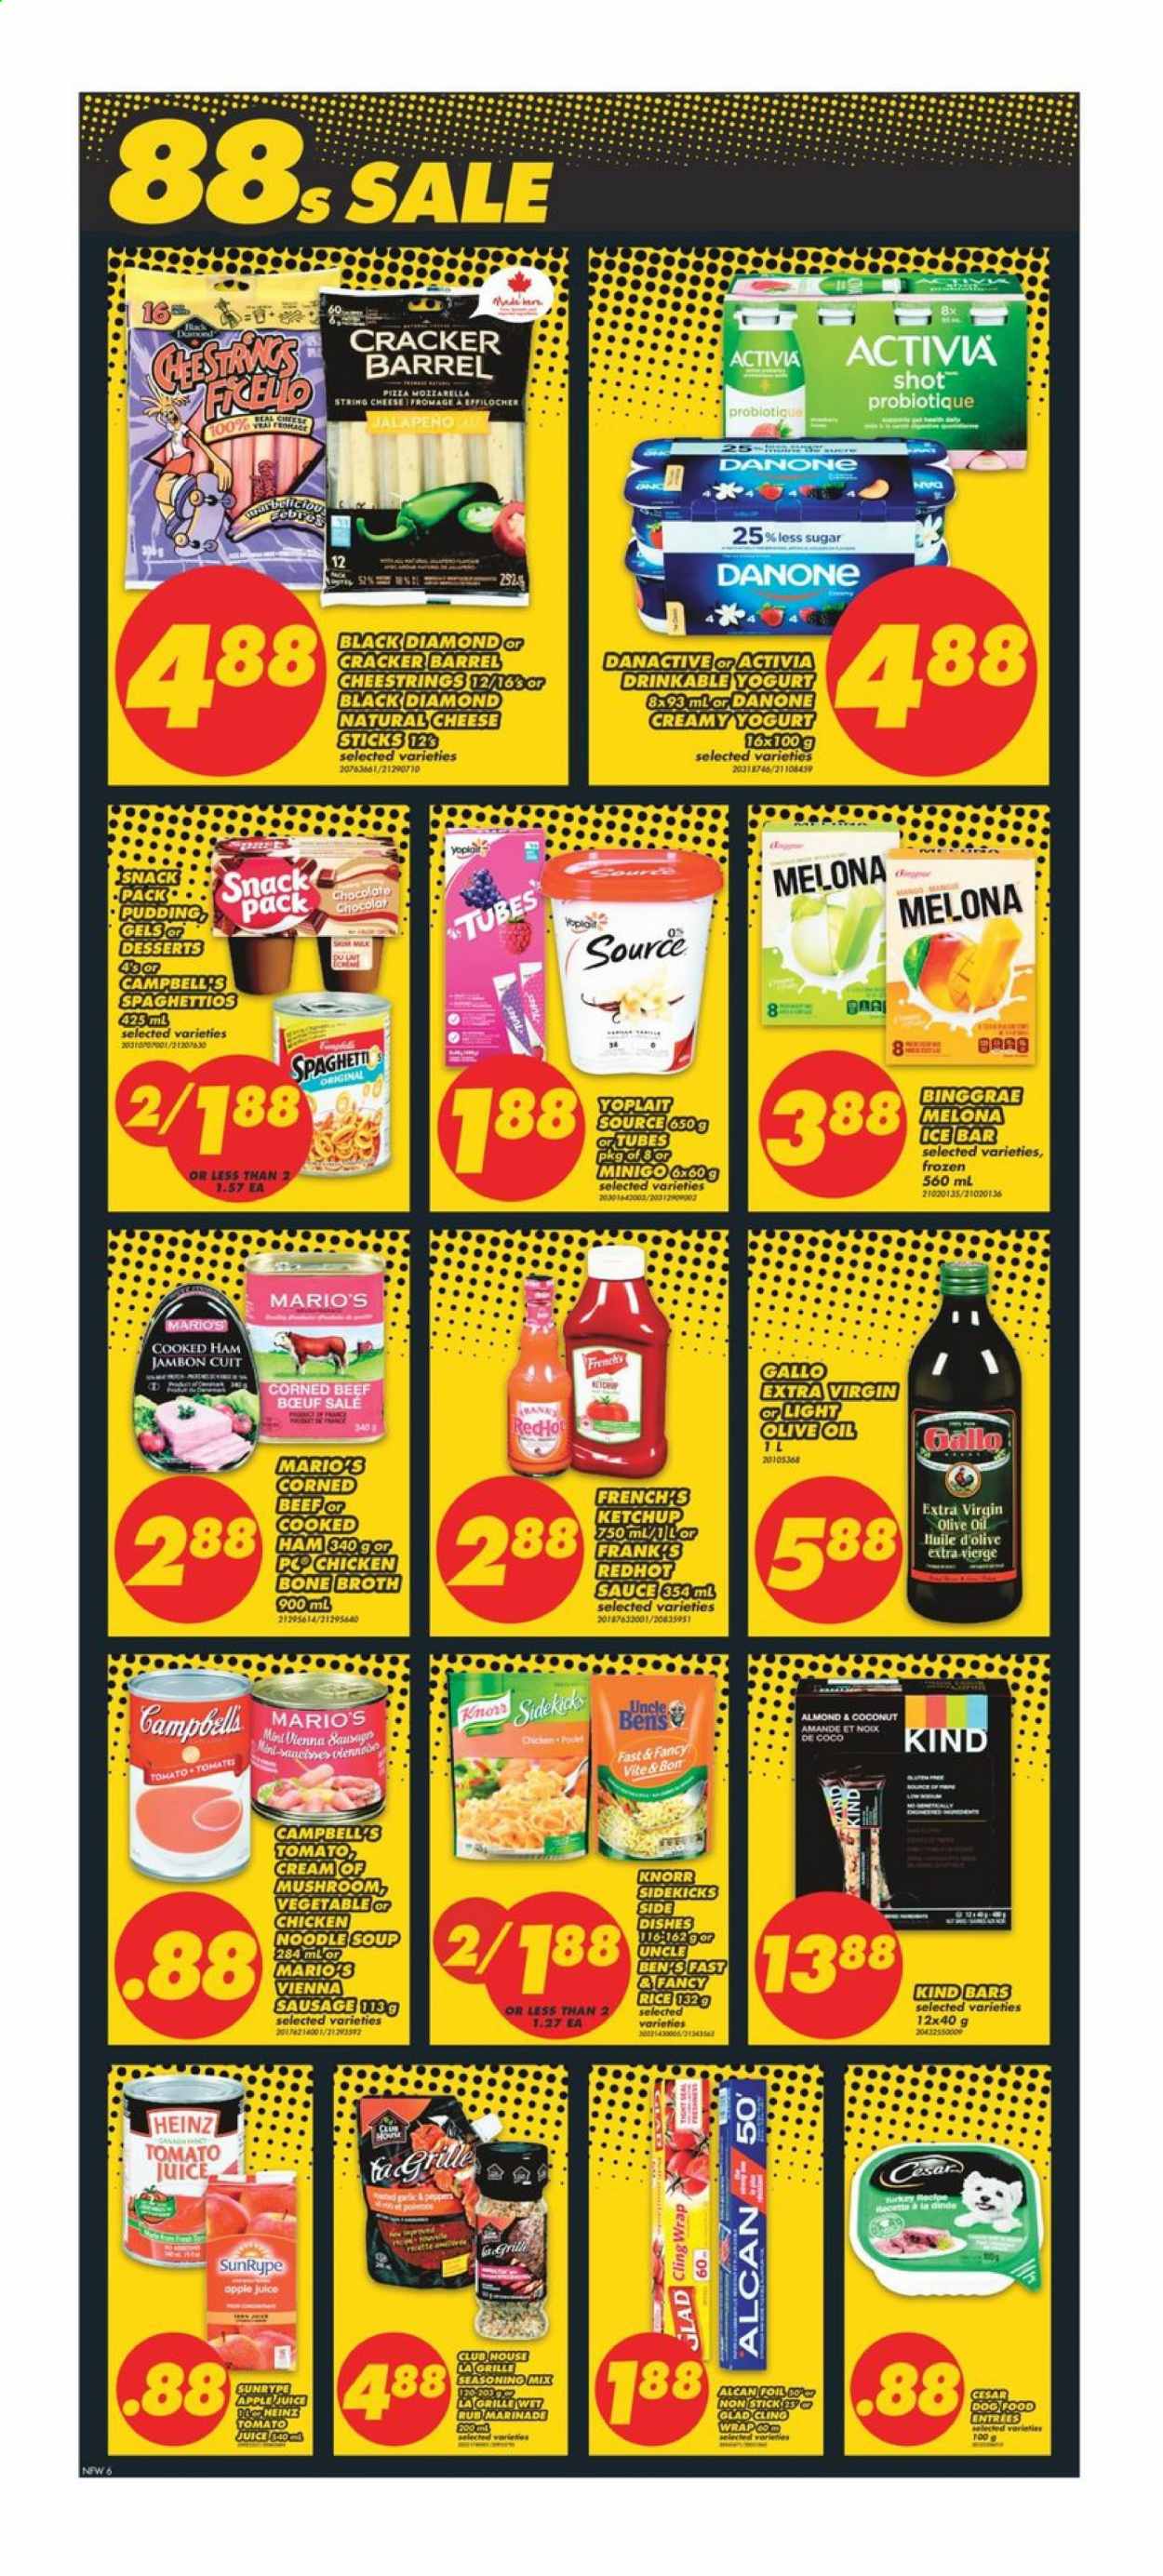 thumbnail - No Frills Flyer - January 08, 2021 - January 14, 2021 - Sales products - mango, Campbell's, pizza, soup, sauce, noodles cup, noodles, cooked ham, ham, sausage, vienna sausage, corned beef, string cheese, pudding, yoghurt, Activia, Yoplait, milk, cheese sticks, crackers, broth, Heinz, Uncle Ben's, rice, spice, marinade, extra virgin olive oil, olive oil, oil, apple juice, tomato juice, juice, beef meat, animal food, dog food, Onix, Knorr, Danone. Page 6.